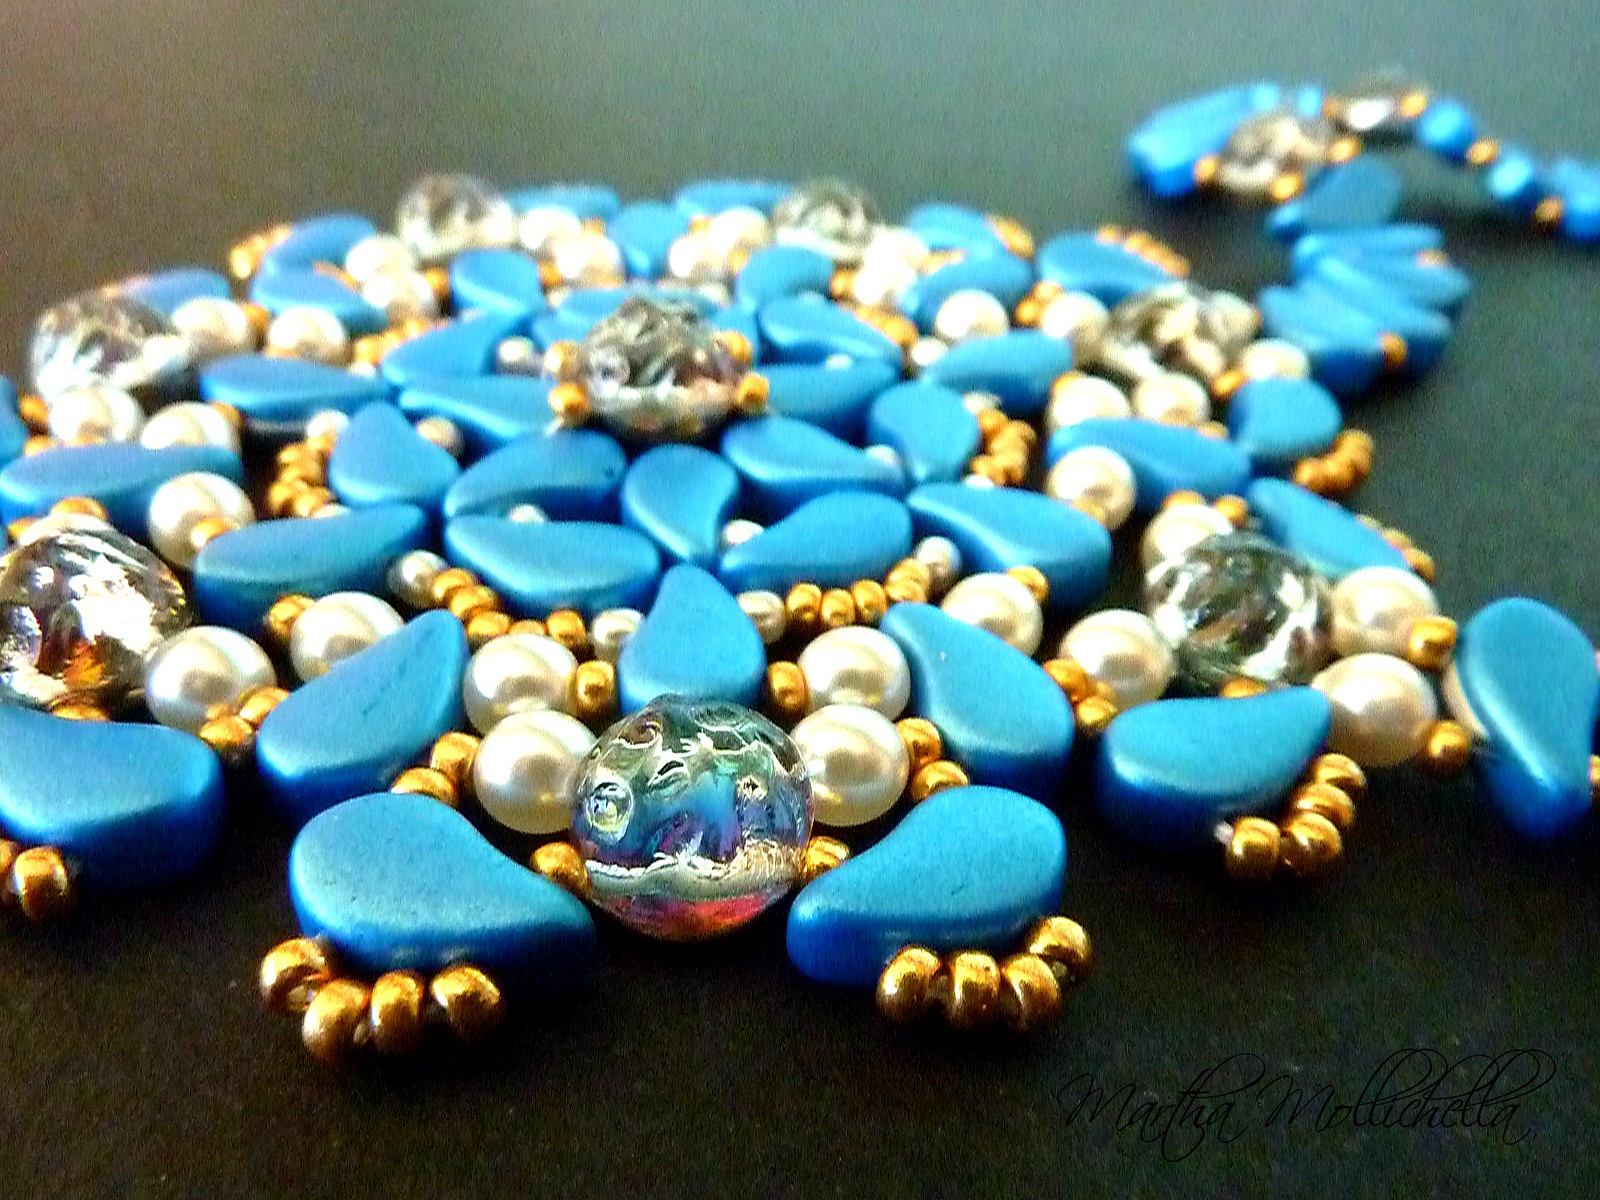 Handmade necklace made with paisley beads and two holes baroque cabochon Martha Mollichella design